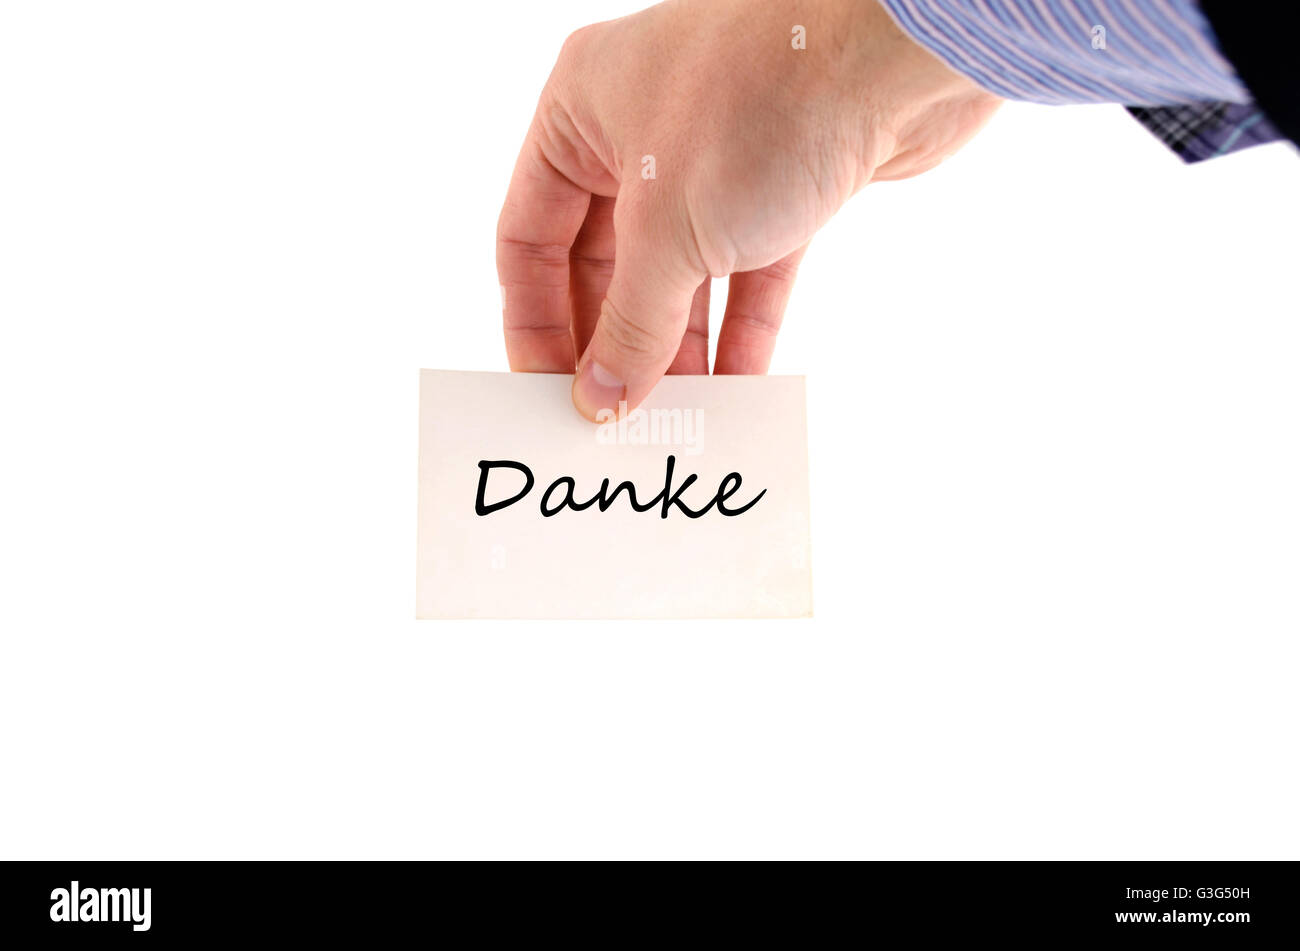 Danke text concept isolated over white background Stock Photo